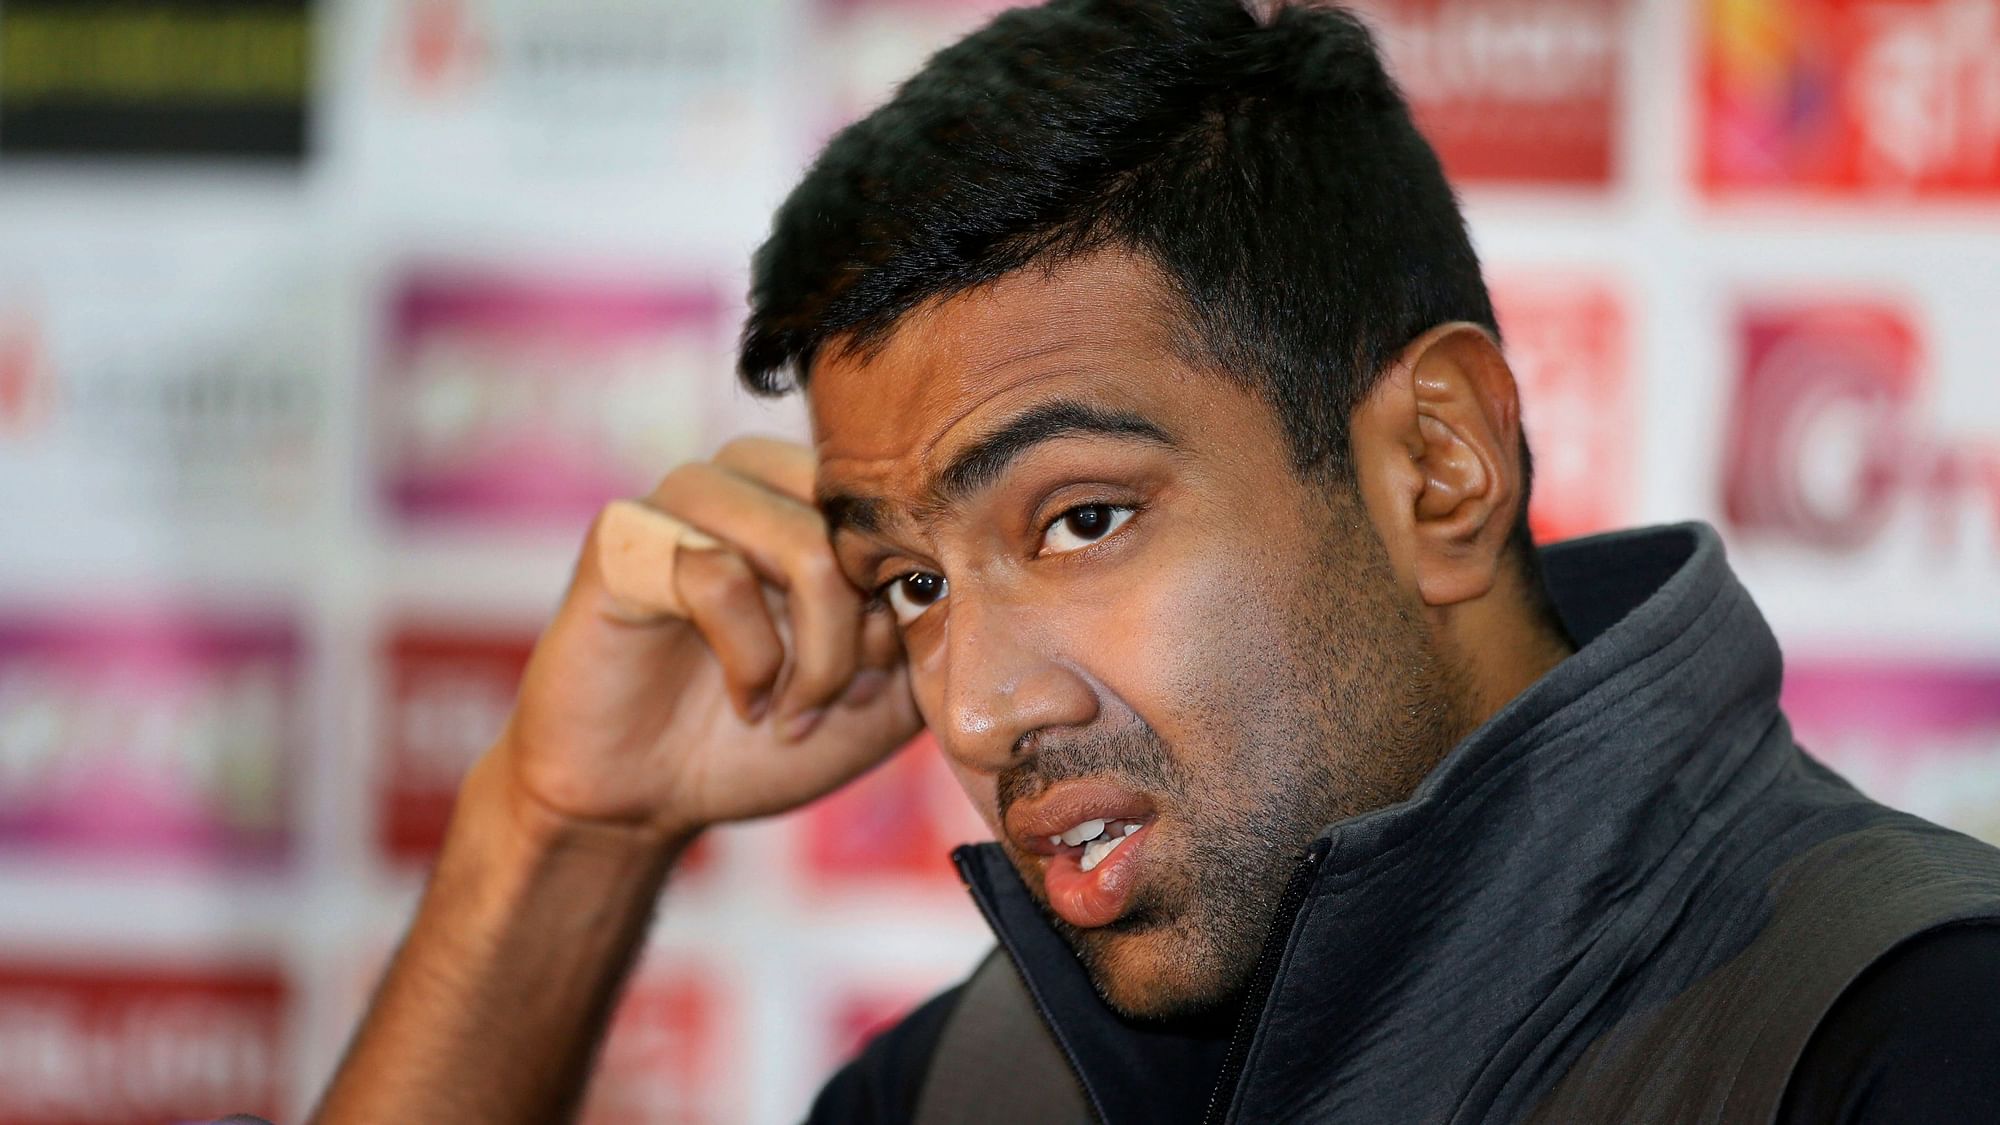 Former India cricketer Madan Lal said a player of Ravichandran Ashwin’s stature should not have “Mankaded” Jos Buttler.